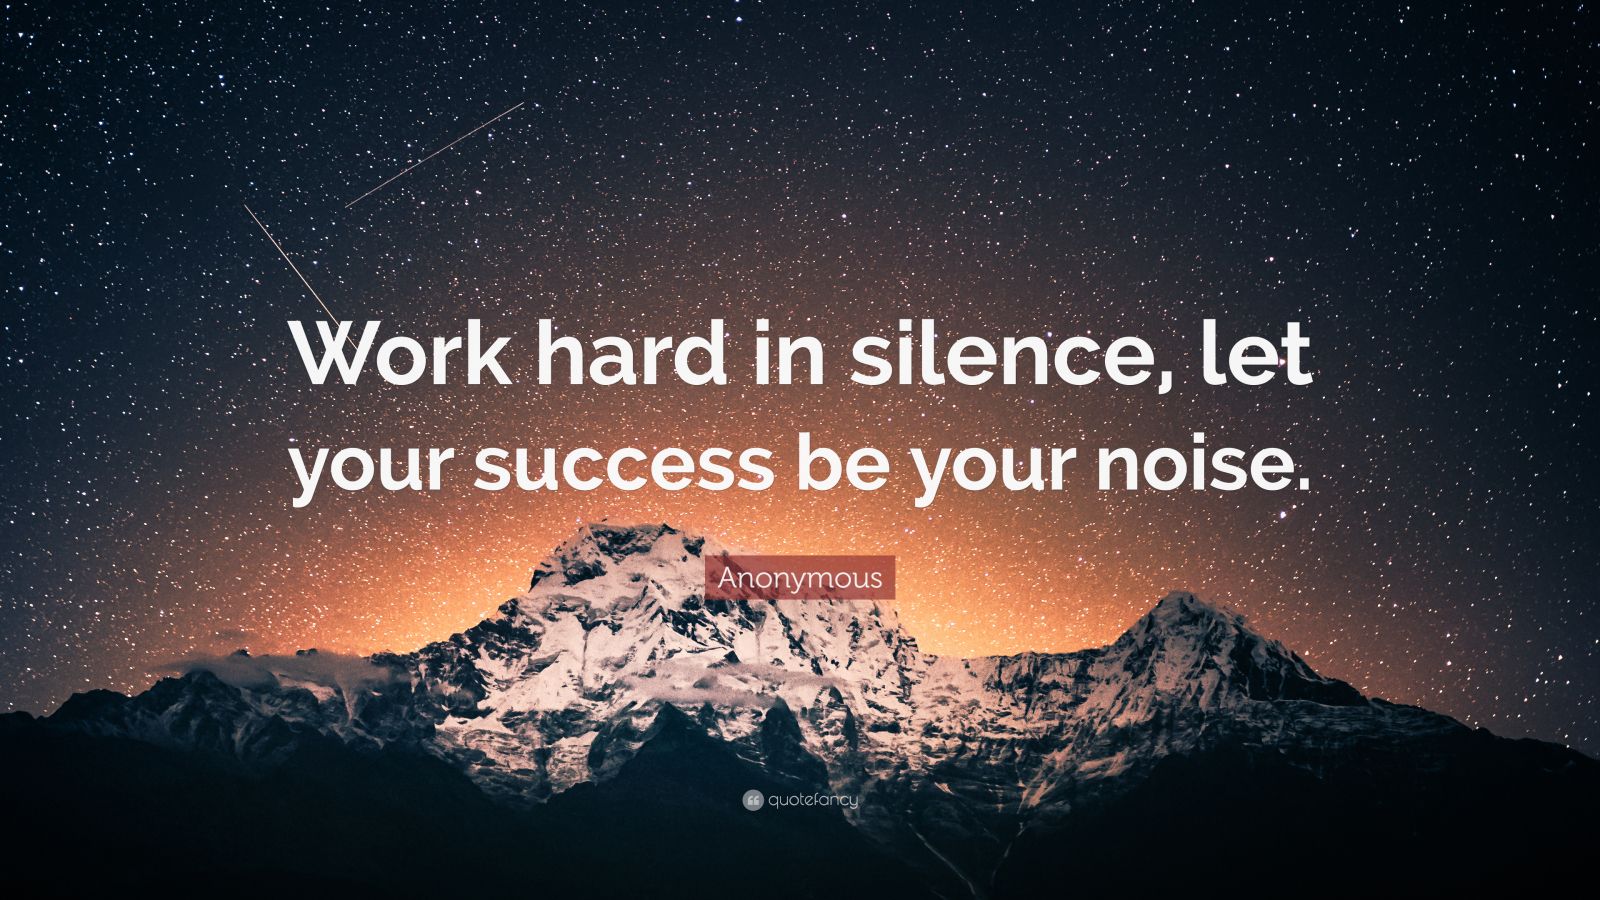 Frank Ocean Quote: "Work hard in silence, let your success ...